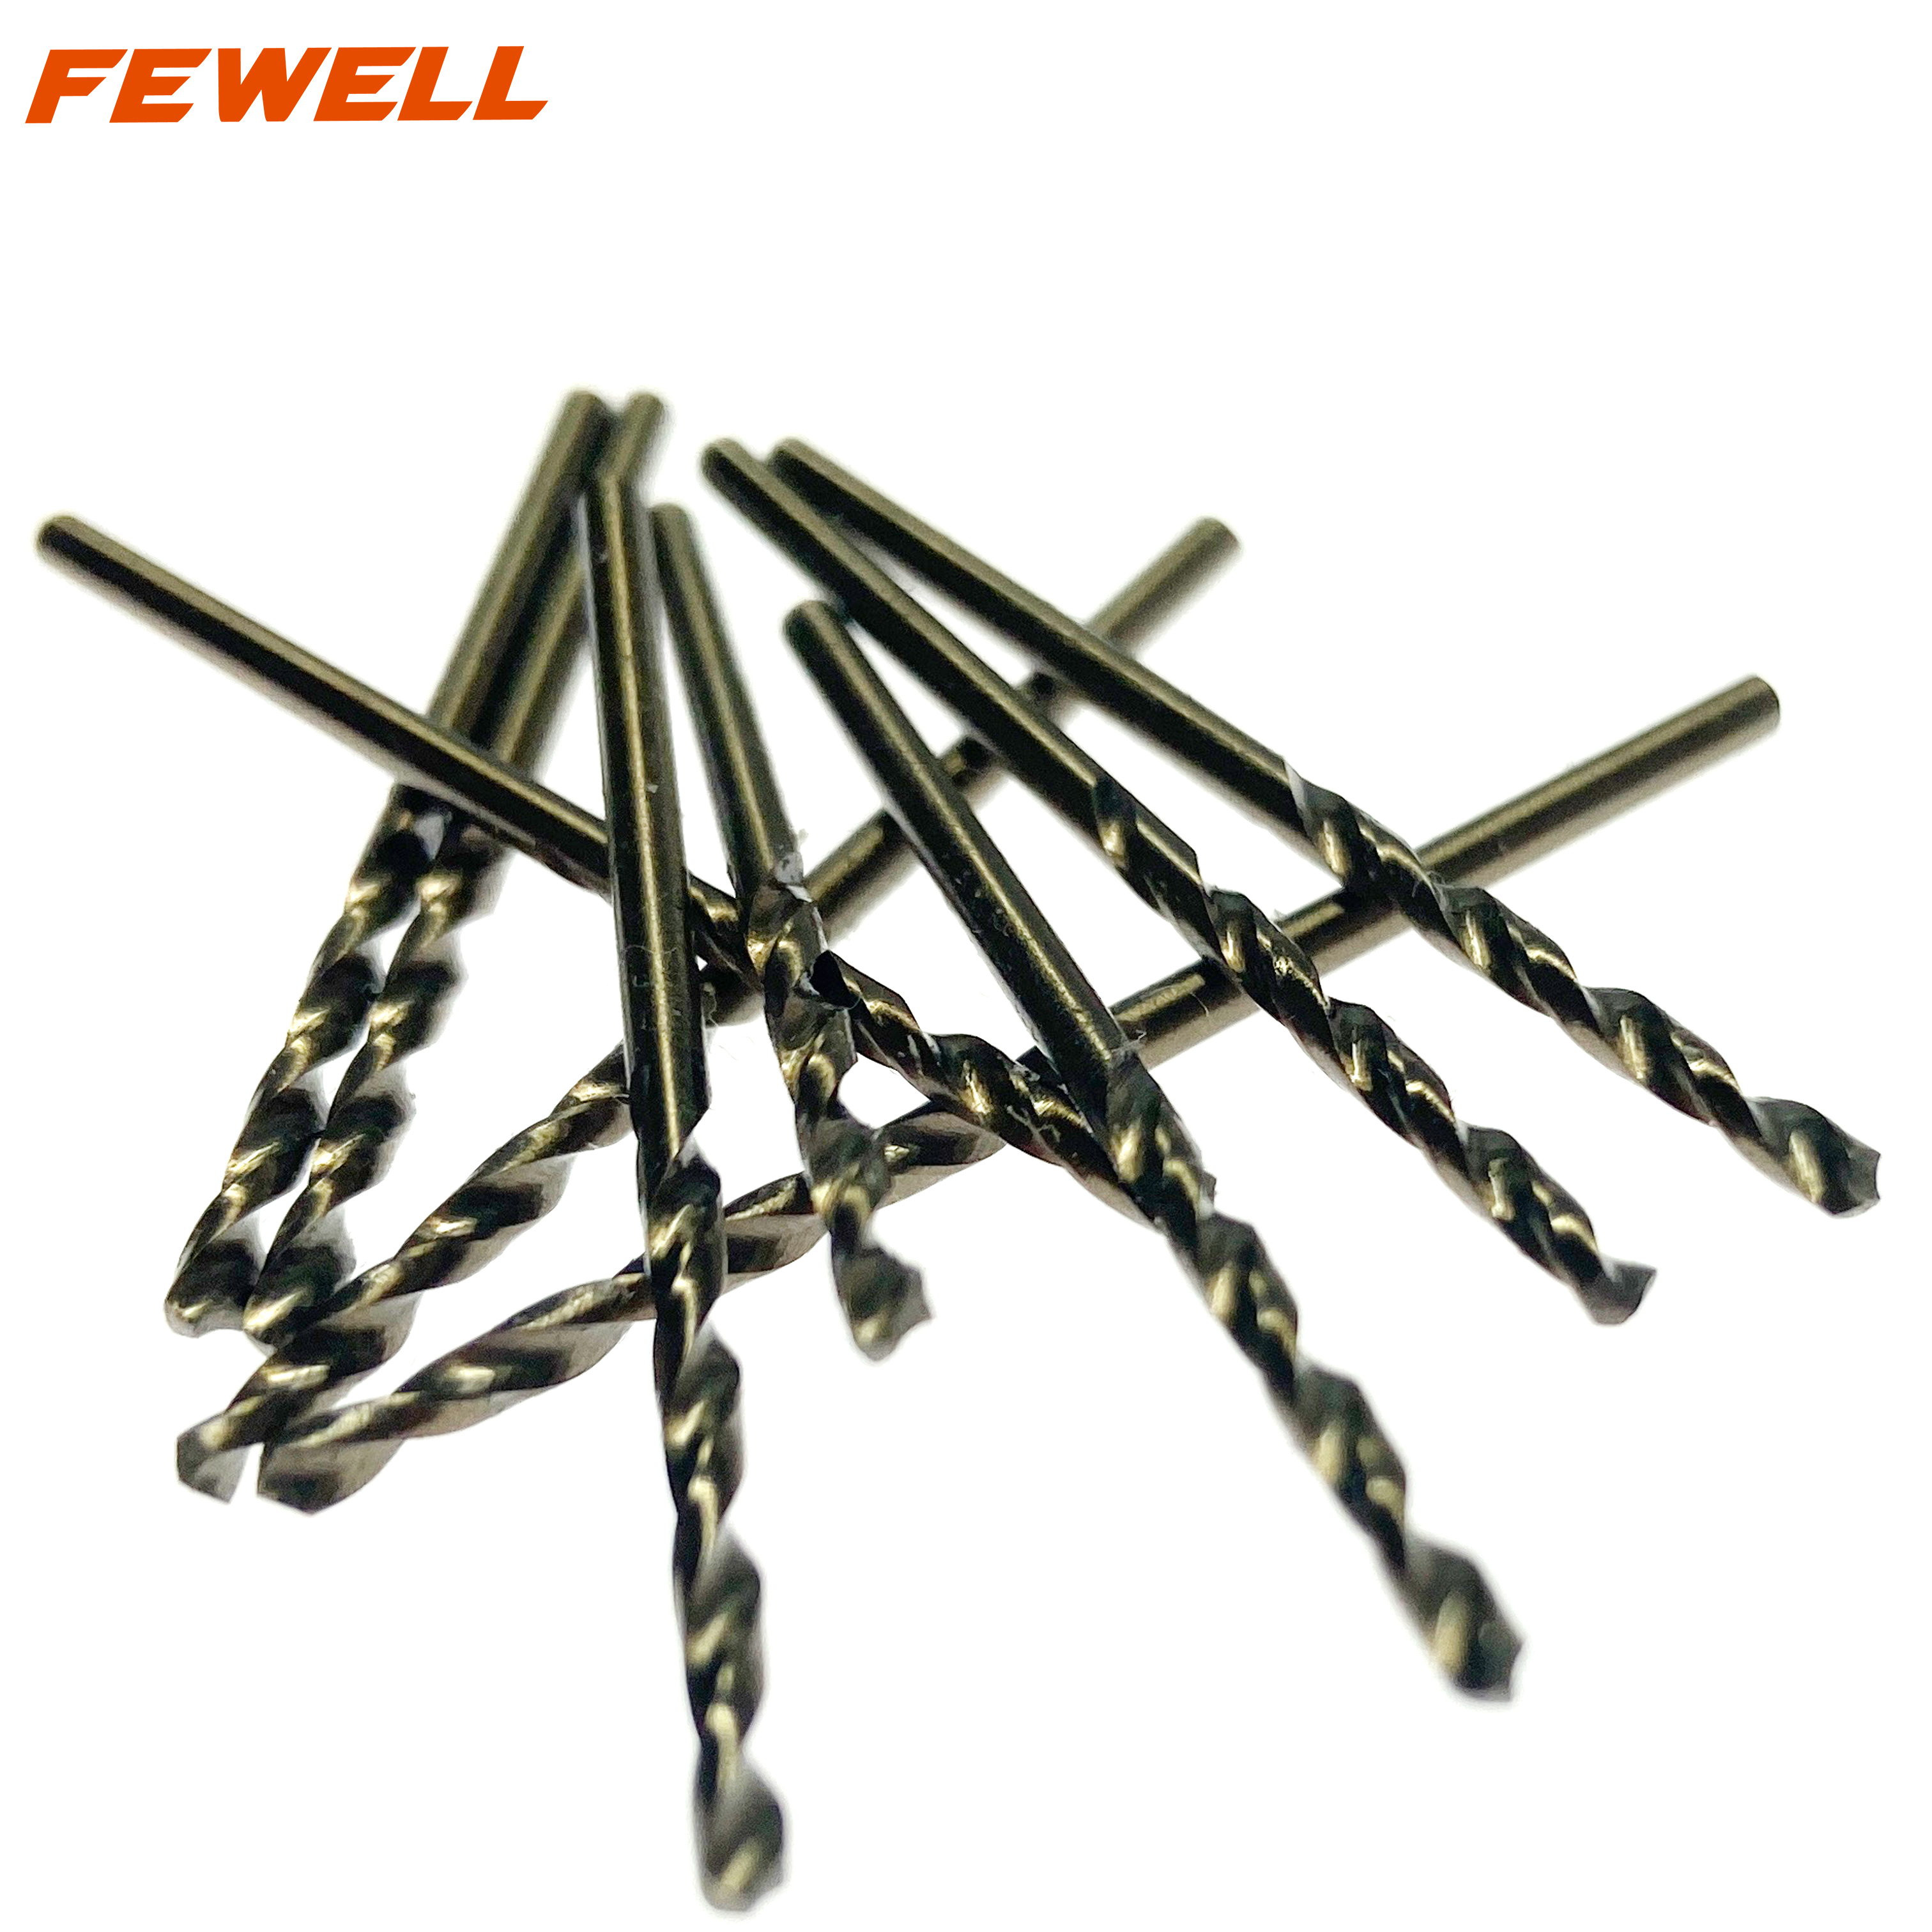 Premium quality M35 straight shank HSS twist drill bits 2-16mm for drilling Metal, inox and Stainless Steel